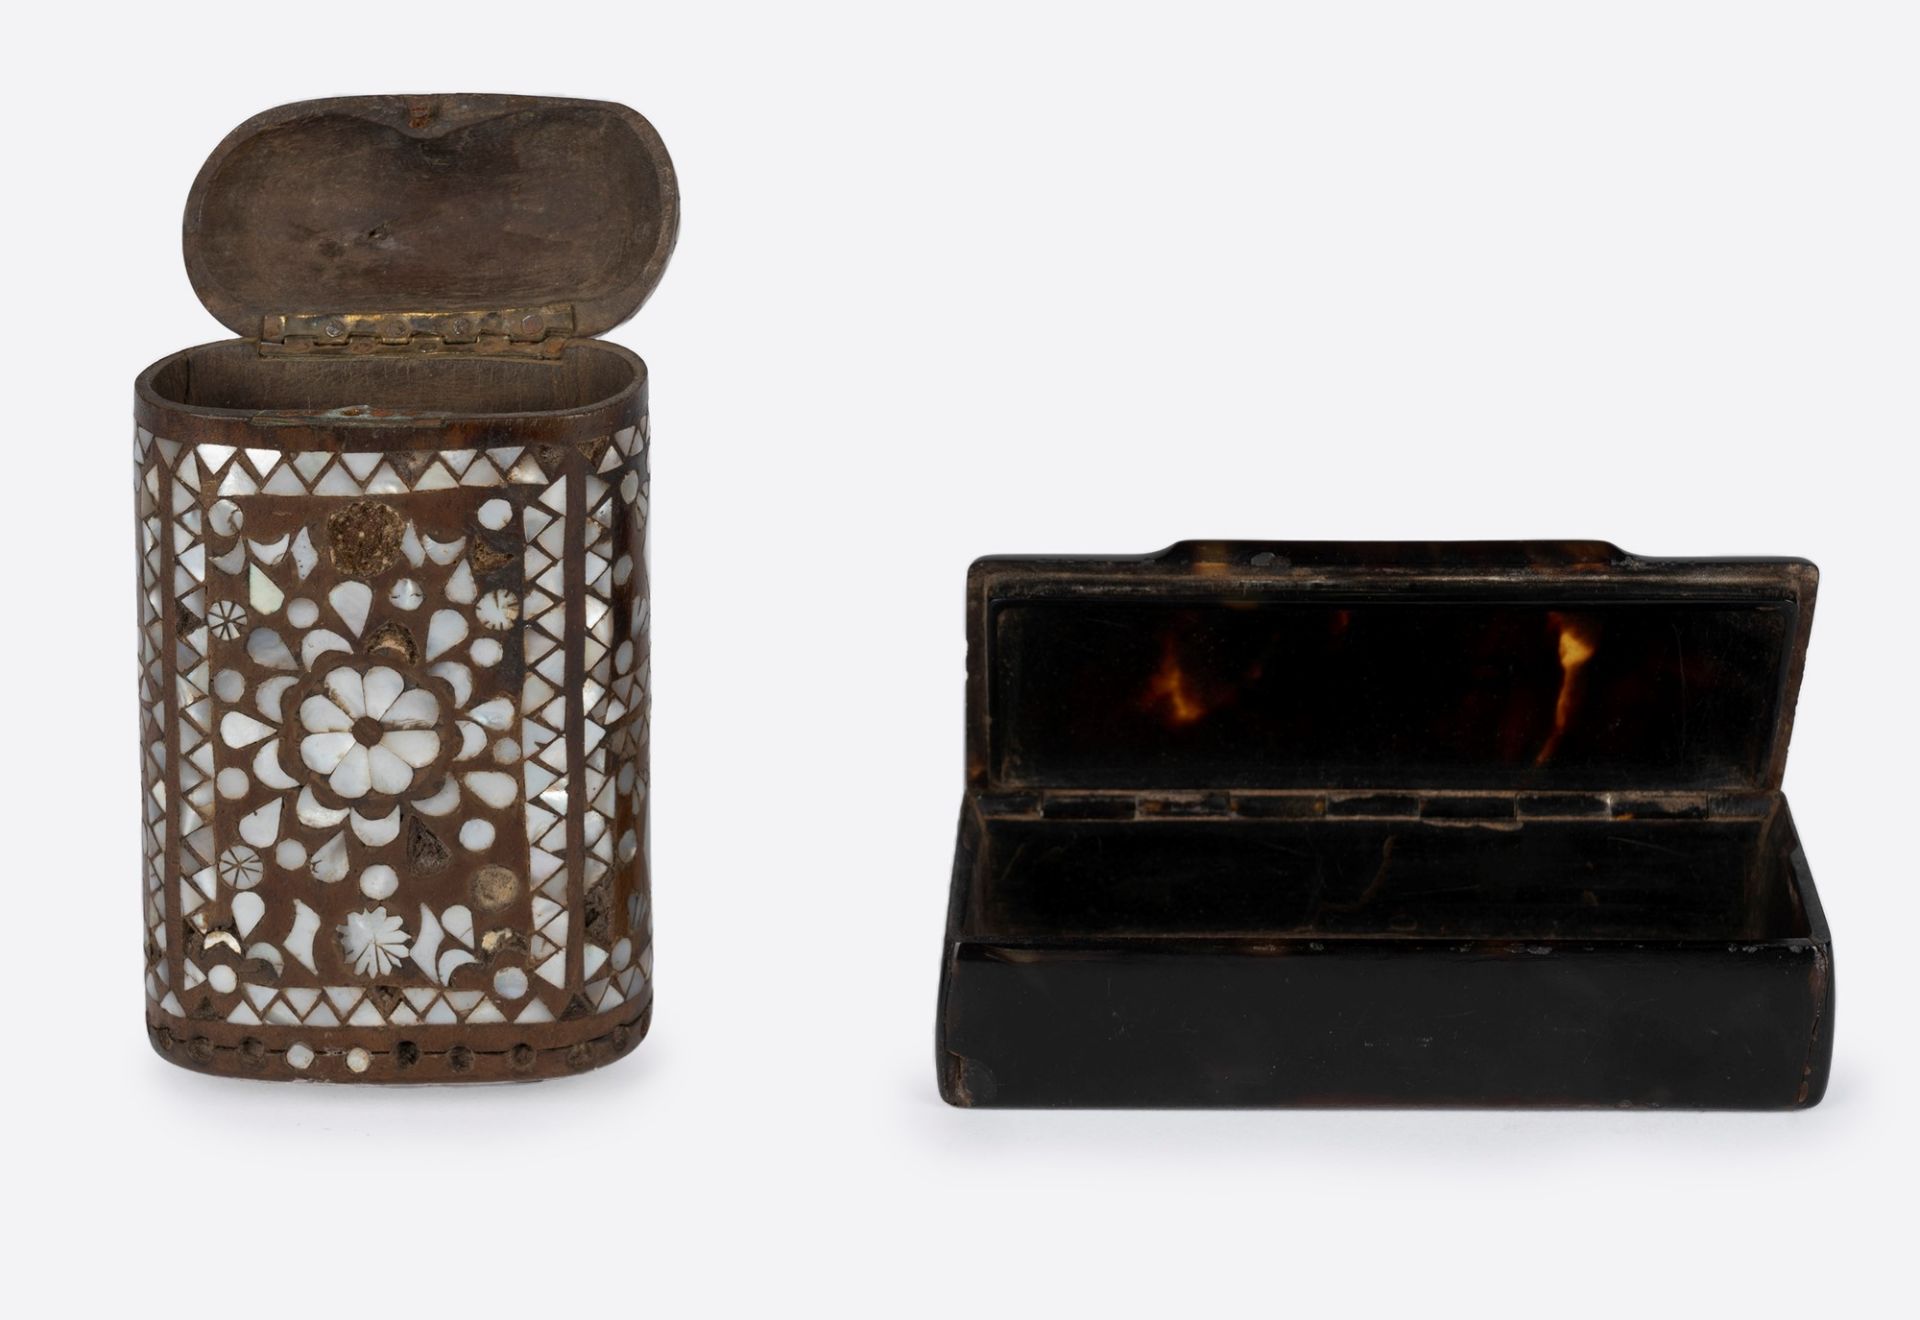 Lot consisting of a small wooden and mother-of-pearl box and another black one, 19th century - Image 2 of 8